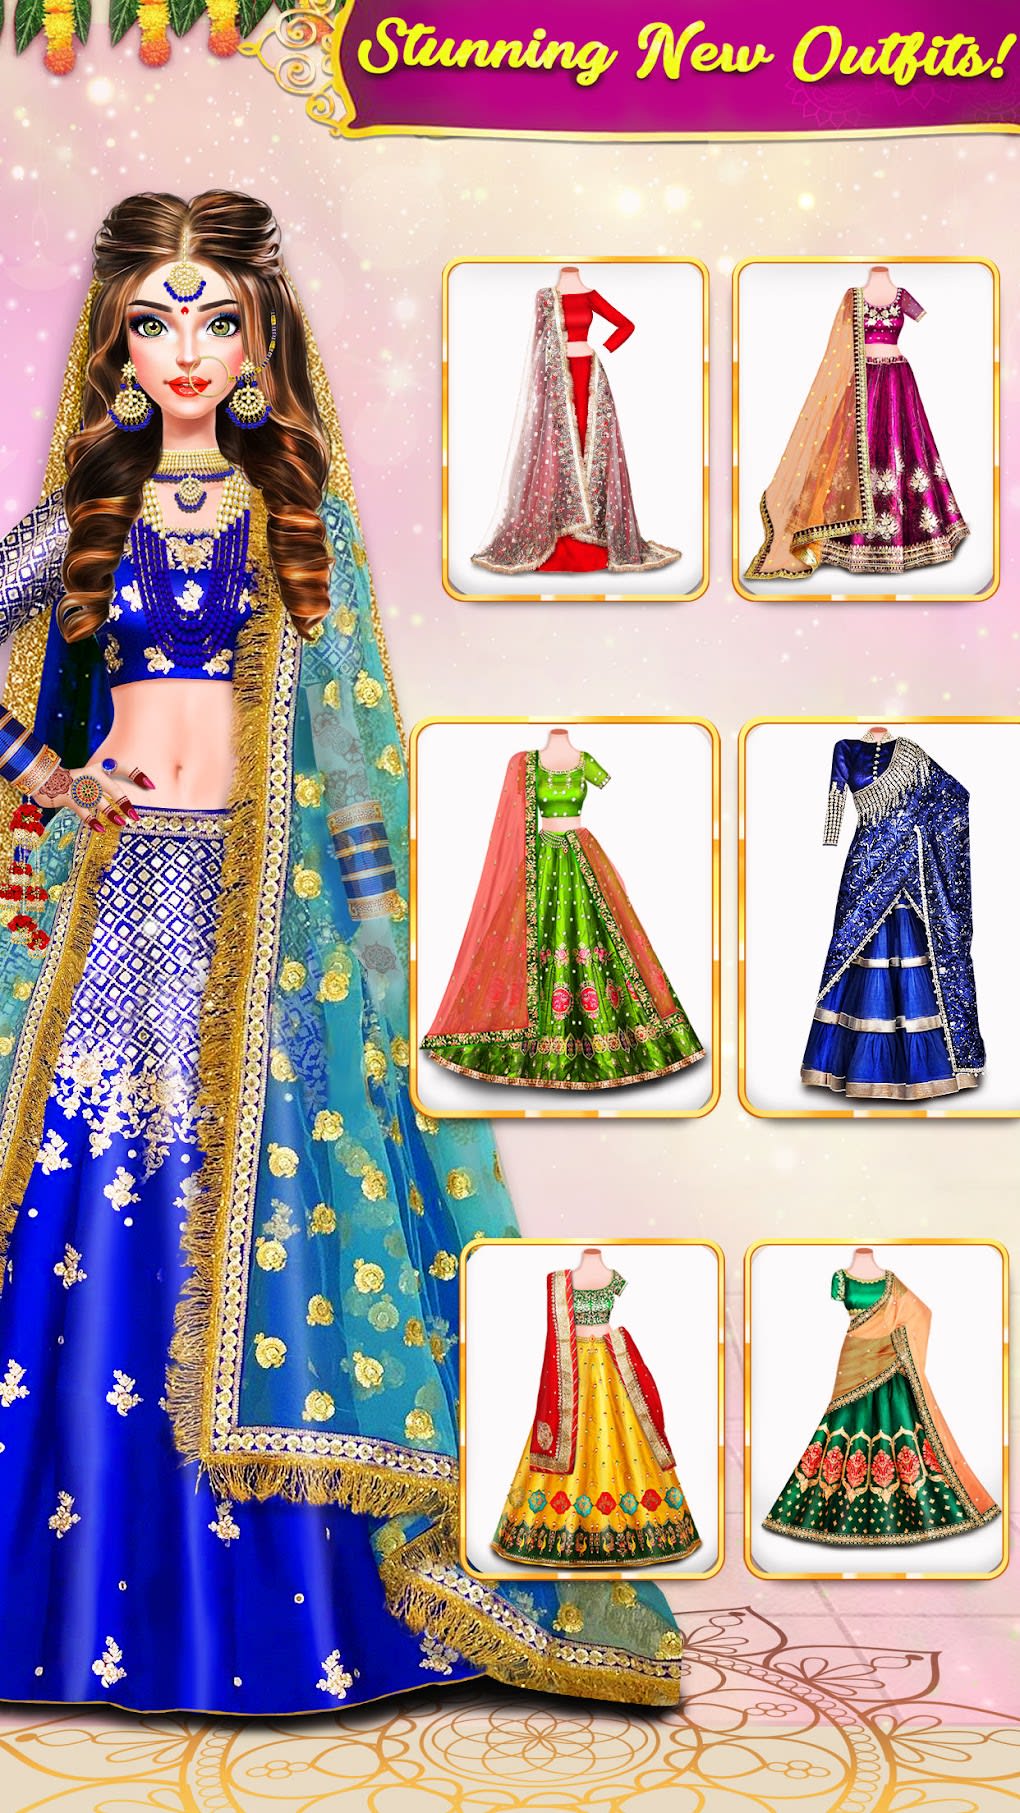 Indian Wedding Arrange Marriage With Indian Culture:Amazon.com:Appstore for  Android